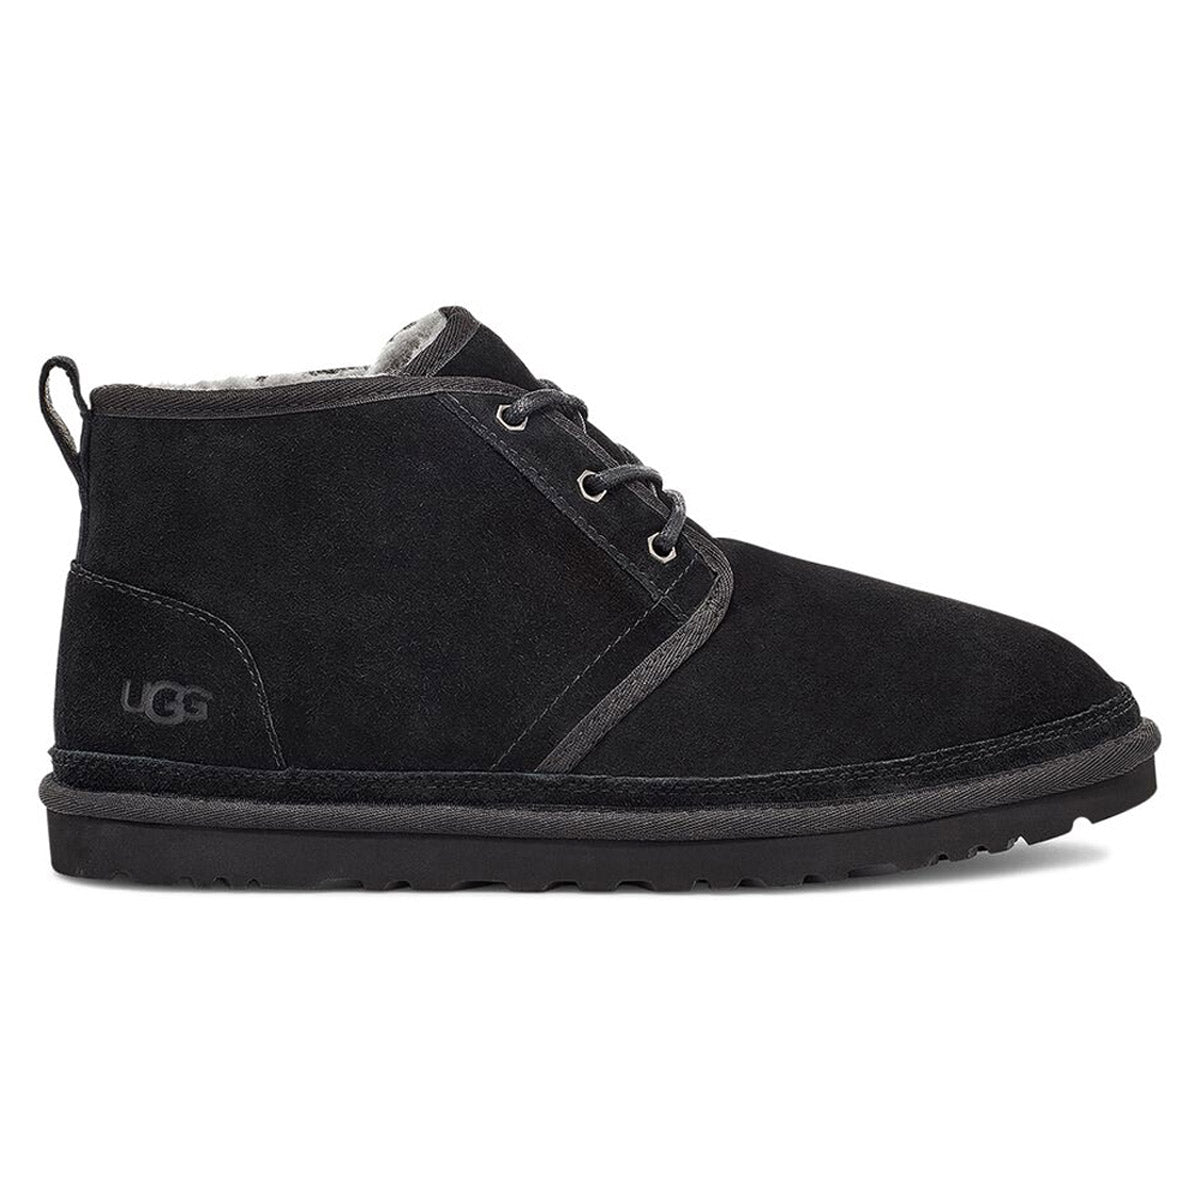 A single black UGG NEUMEL CHUKKA BOOT BLACK - MENS in suede with lace-up closure and a logo tag on the heel, against a white background.